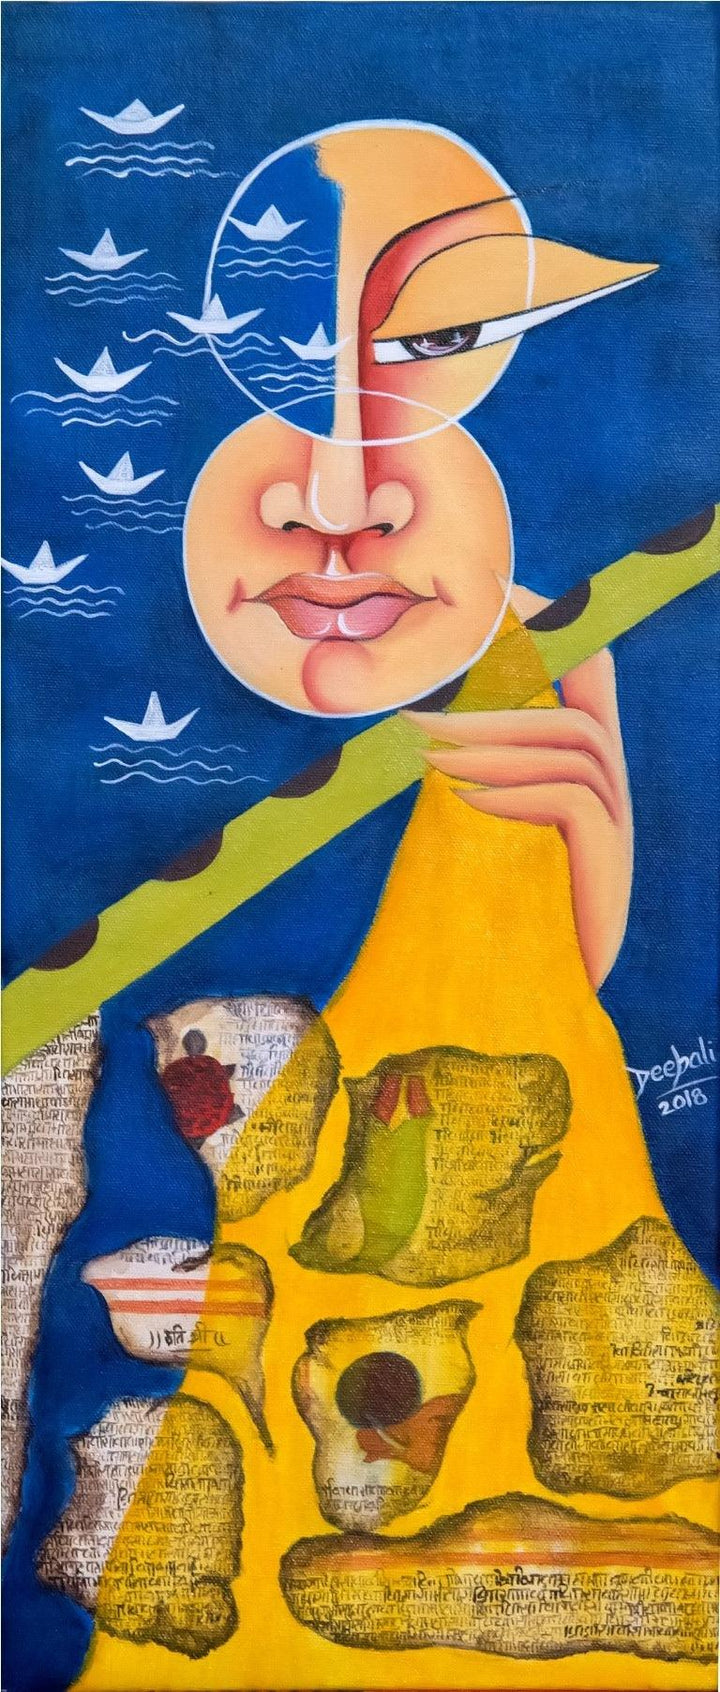 Life And The Dreams Painting by Deepali Mundra | ArtZolo.com